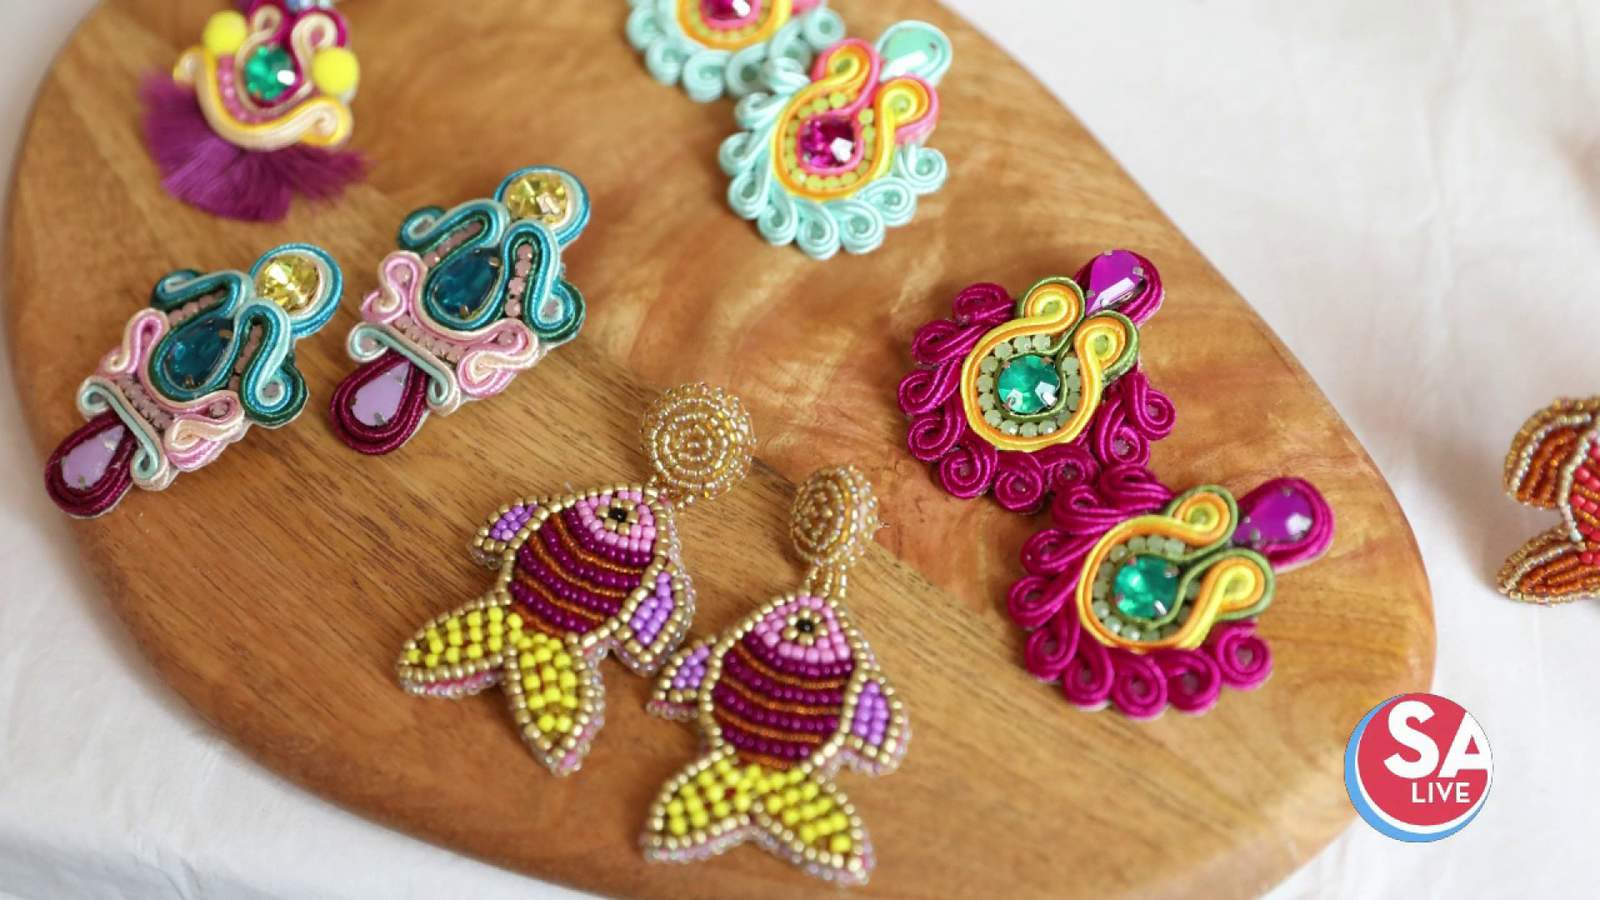 Local business celebrates Colombian culture through artisan jewelry